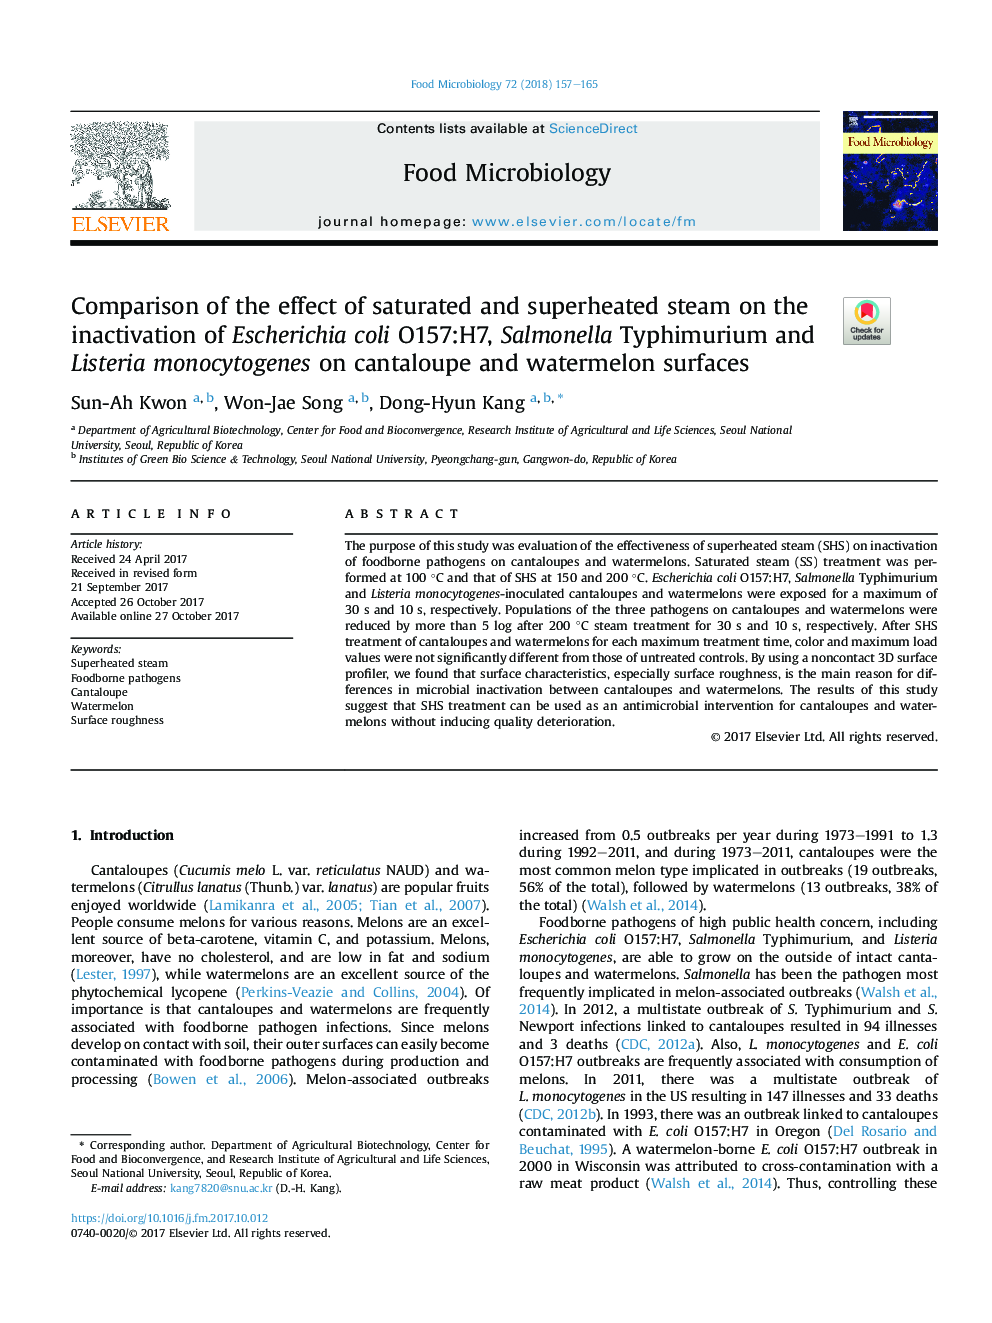 Comparison of the effect of saturated and superheated steam on the inactivation of Escherichia coli O157:H7, Salmonella Typhimurium and Listeria monocytogenes on cantaloupe and watermelon surfaces